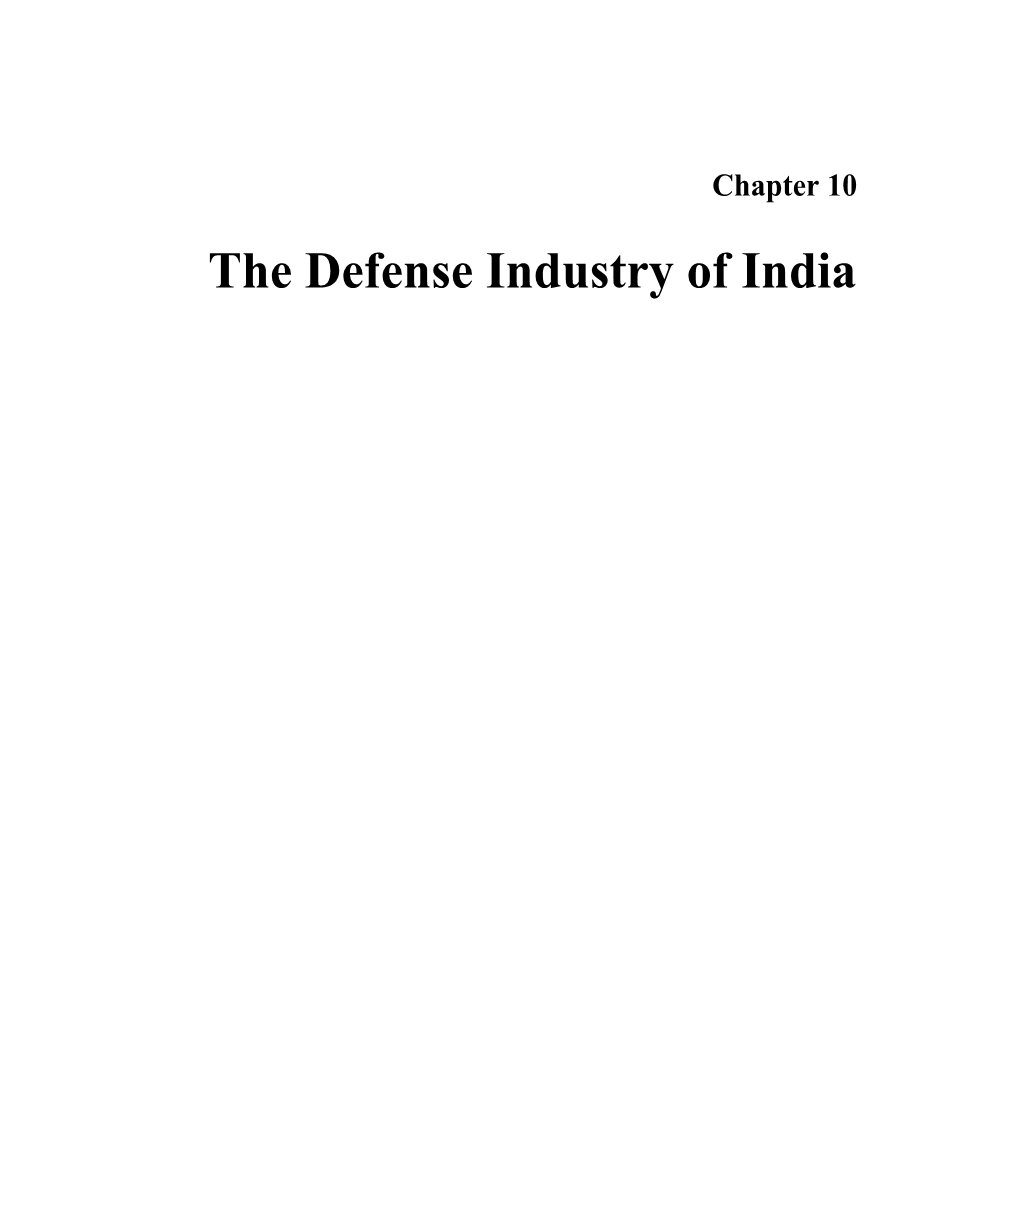 Commerce in Advanced Military Technology and Weapons